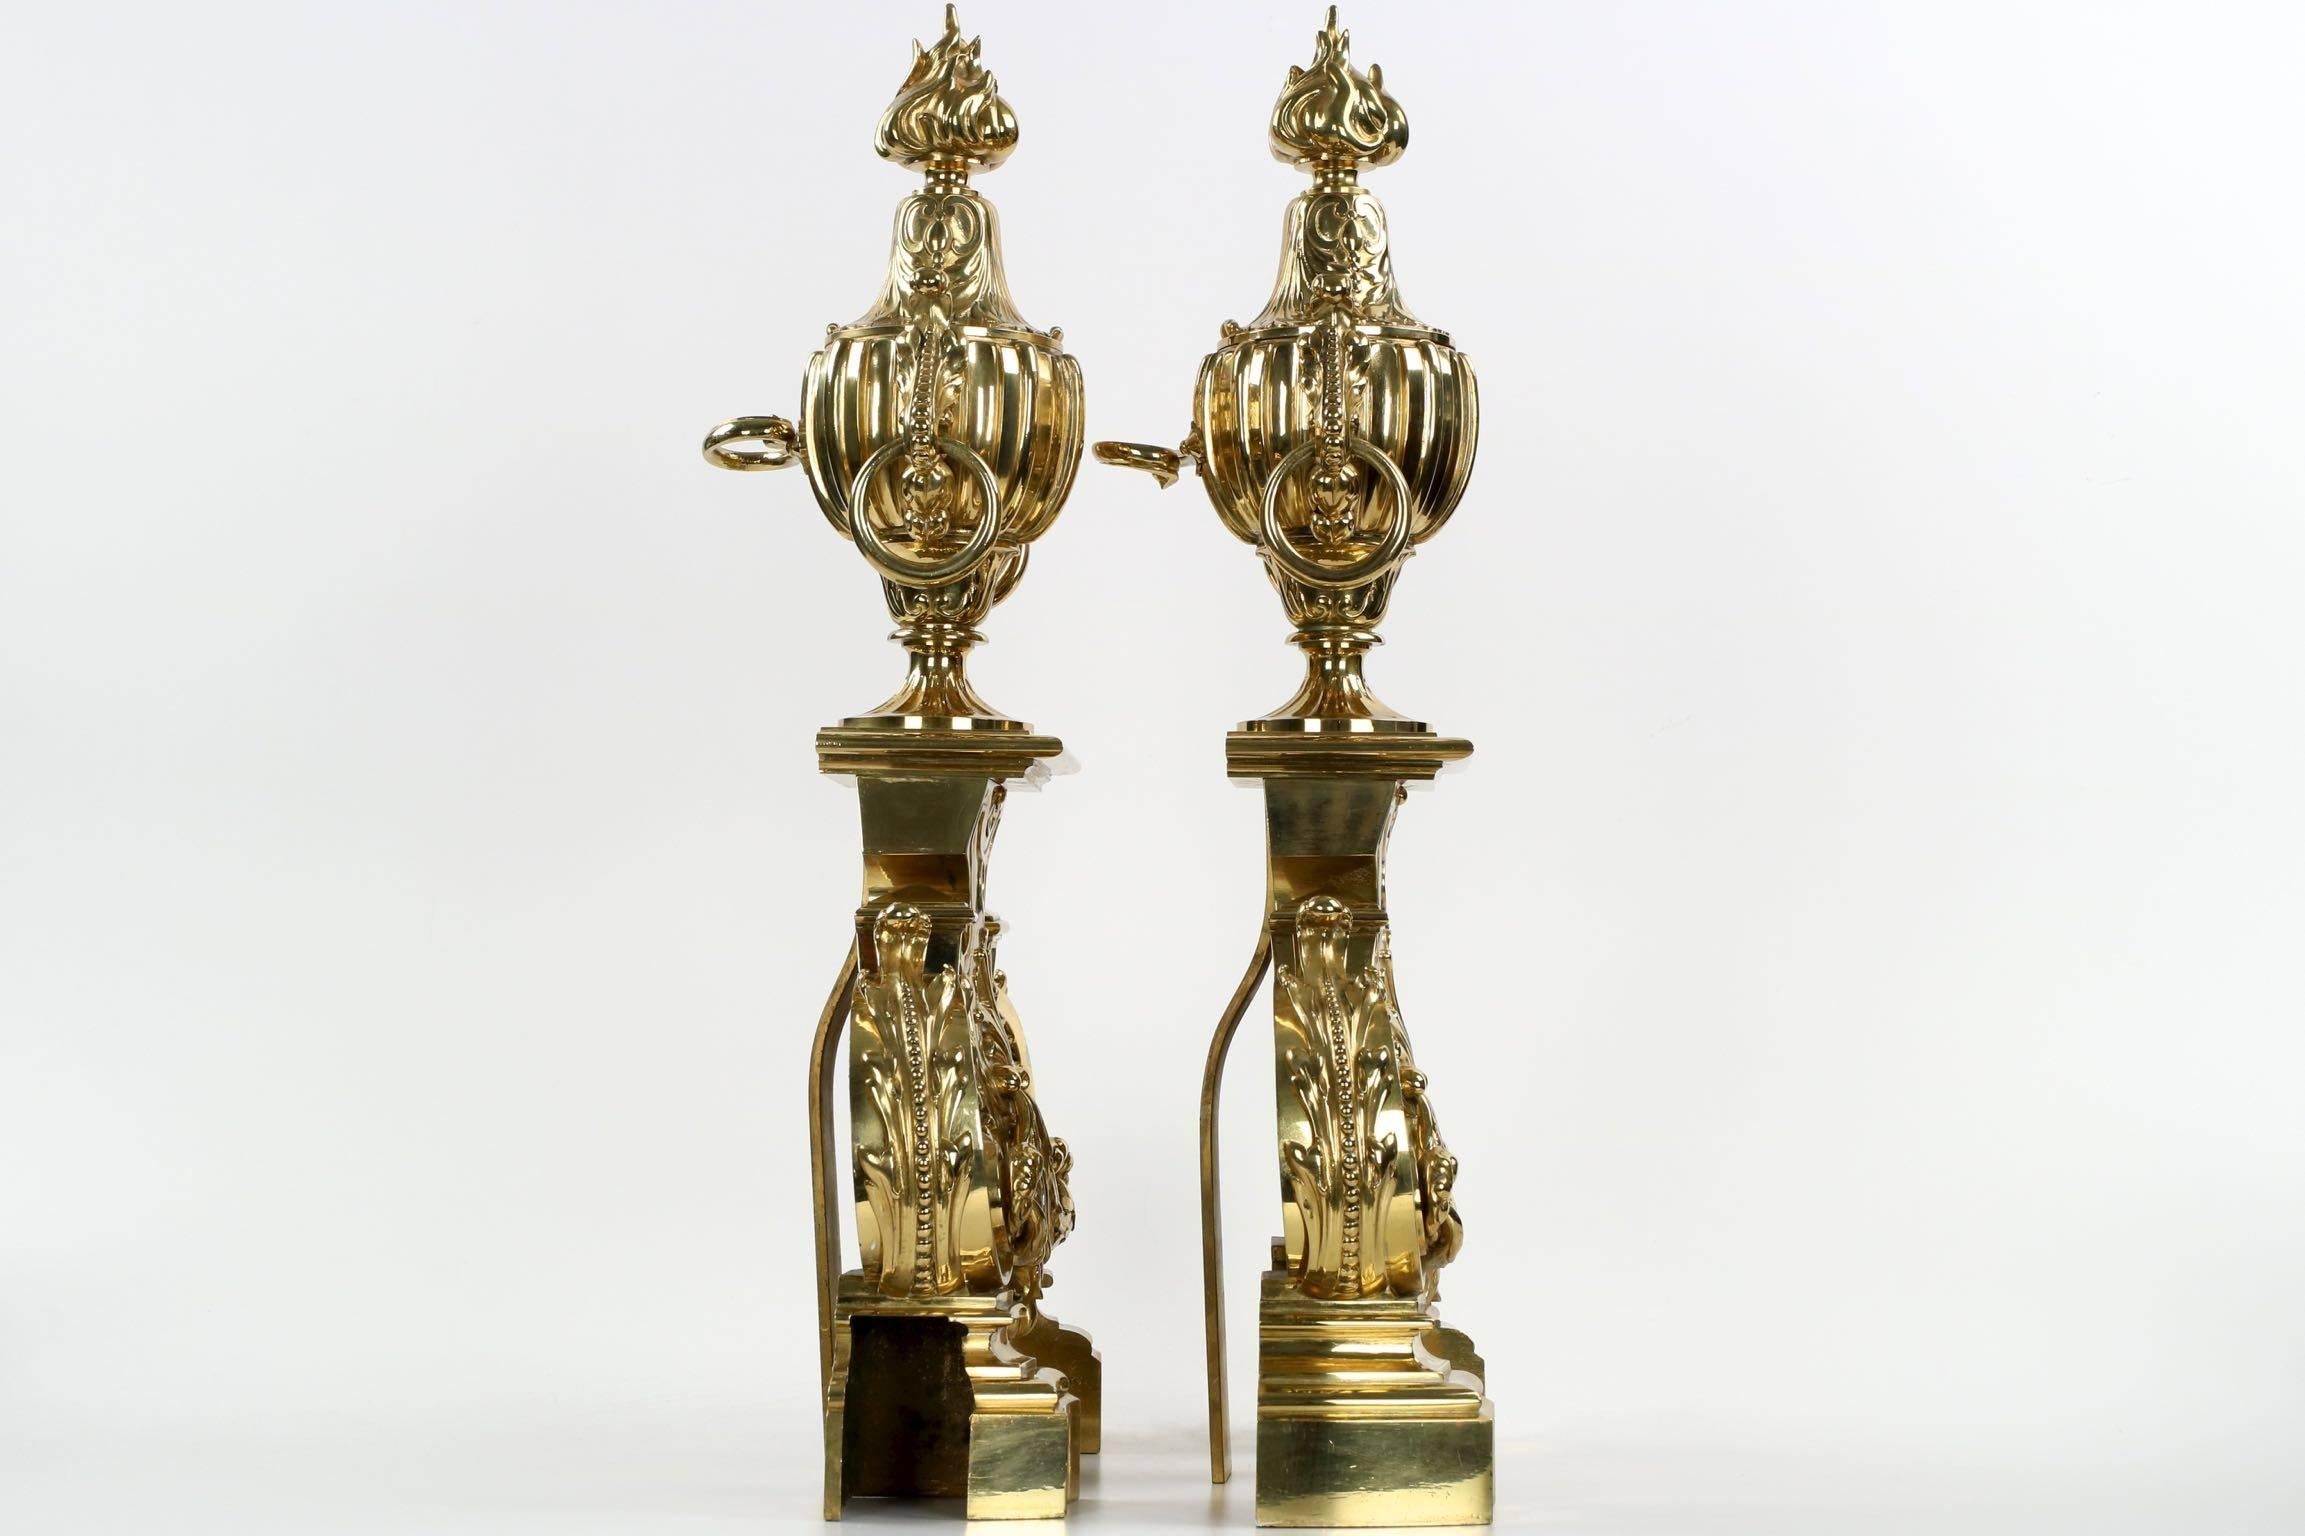 An incredibly intricate and finely cast pair of chenets by the firm of Ferdinand Barbedienne, these make a powerful statement in the classical interior. The polished brass surface is nearly mirror grade in quality, the quality of the casting being